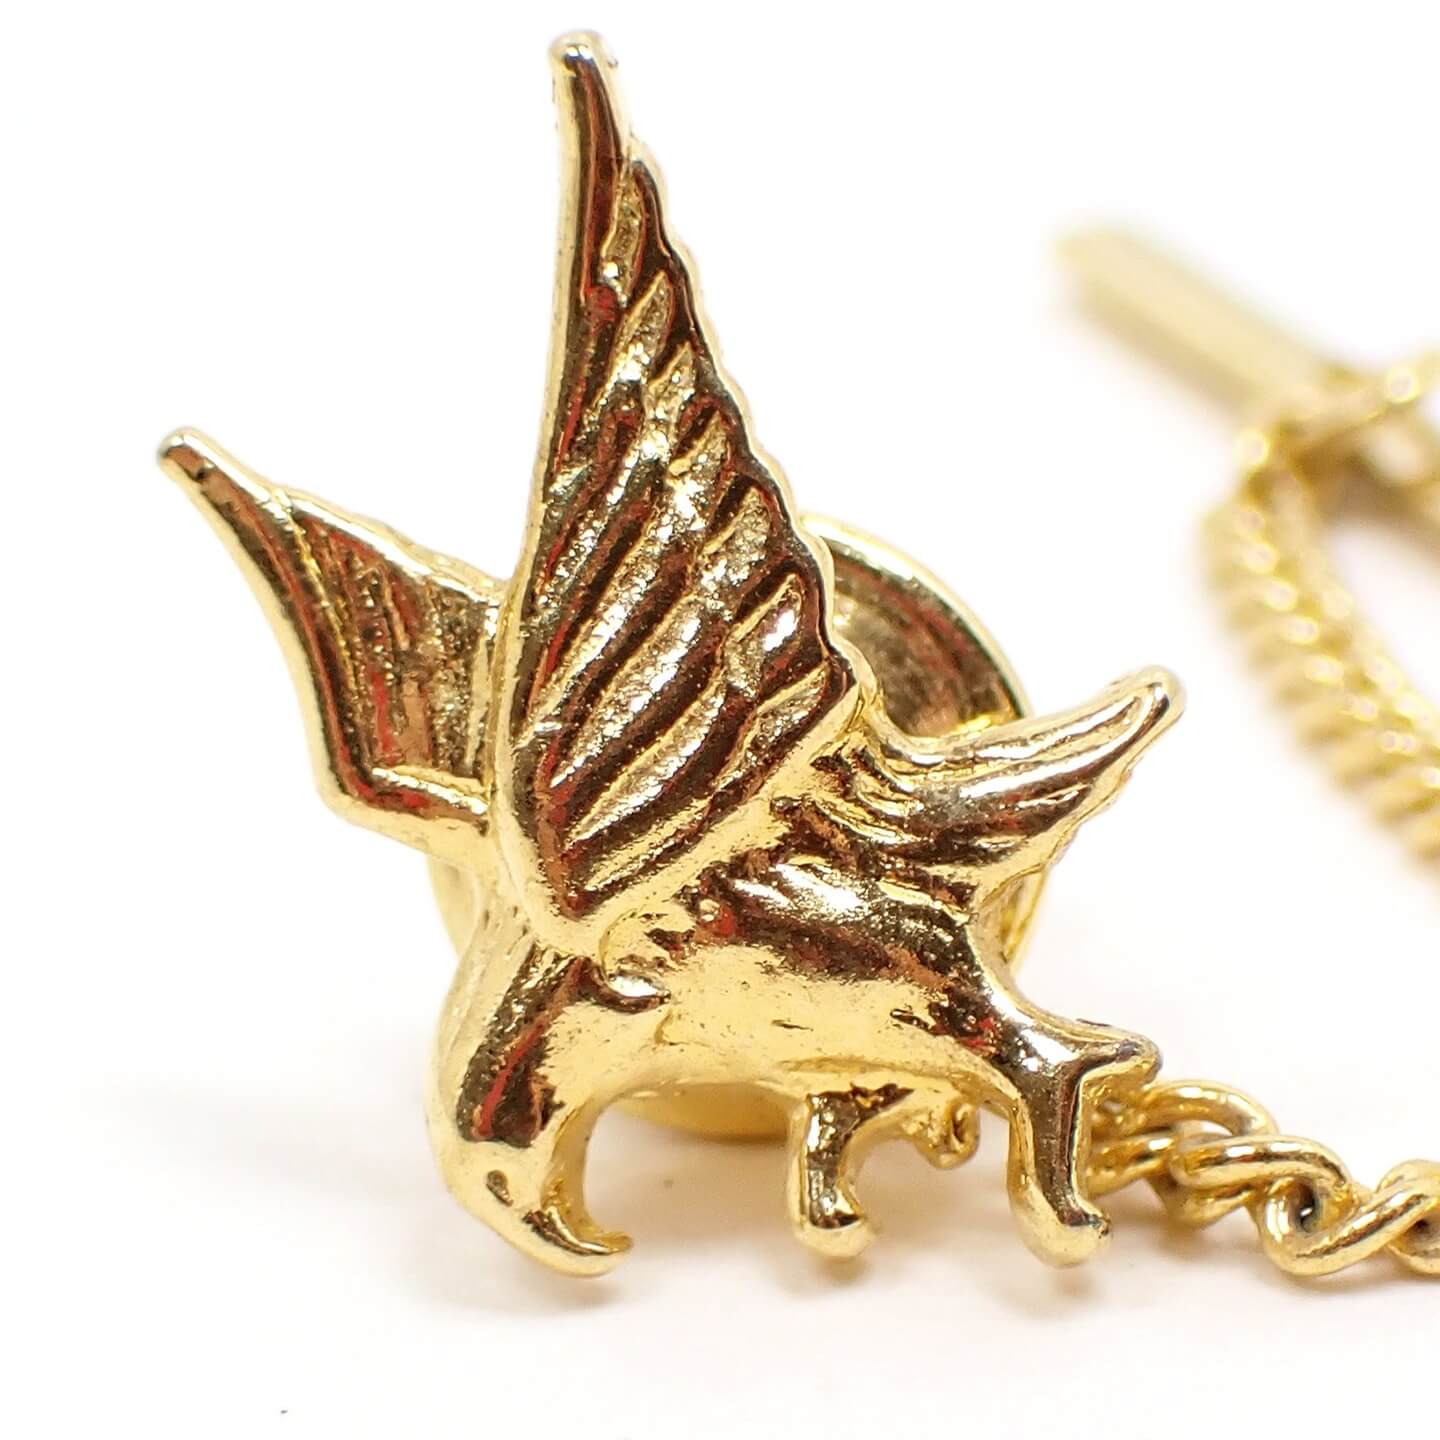 Enlarged front view of the retro vintage eagle tie tack. The metal is gold tone plated in color. The tie tack is shaped like a flying eagle with its sings out and talons spread to grab something or land.